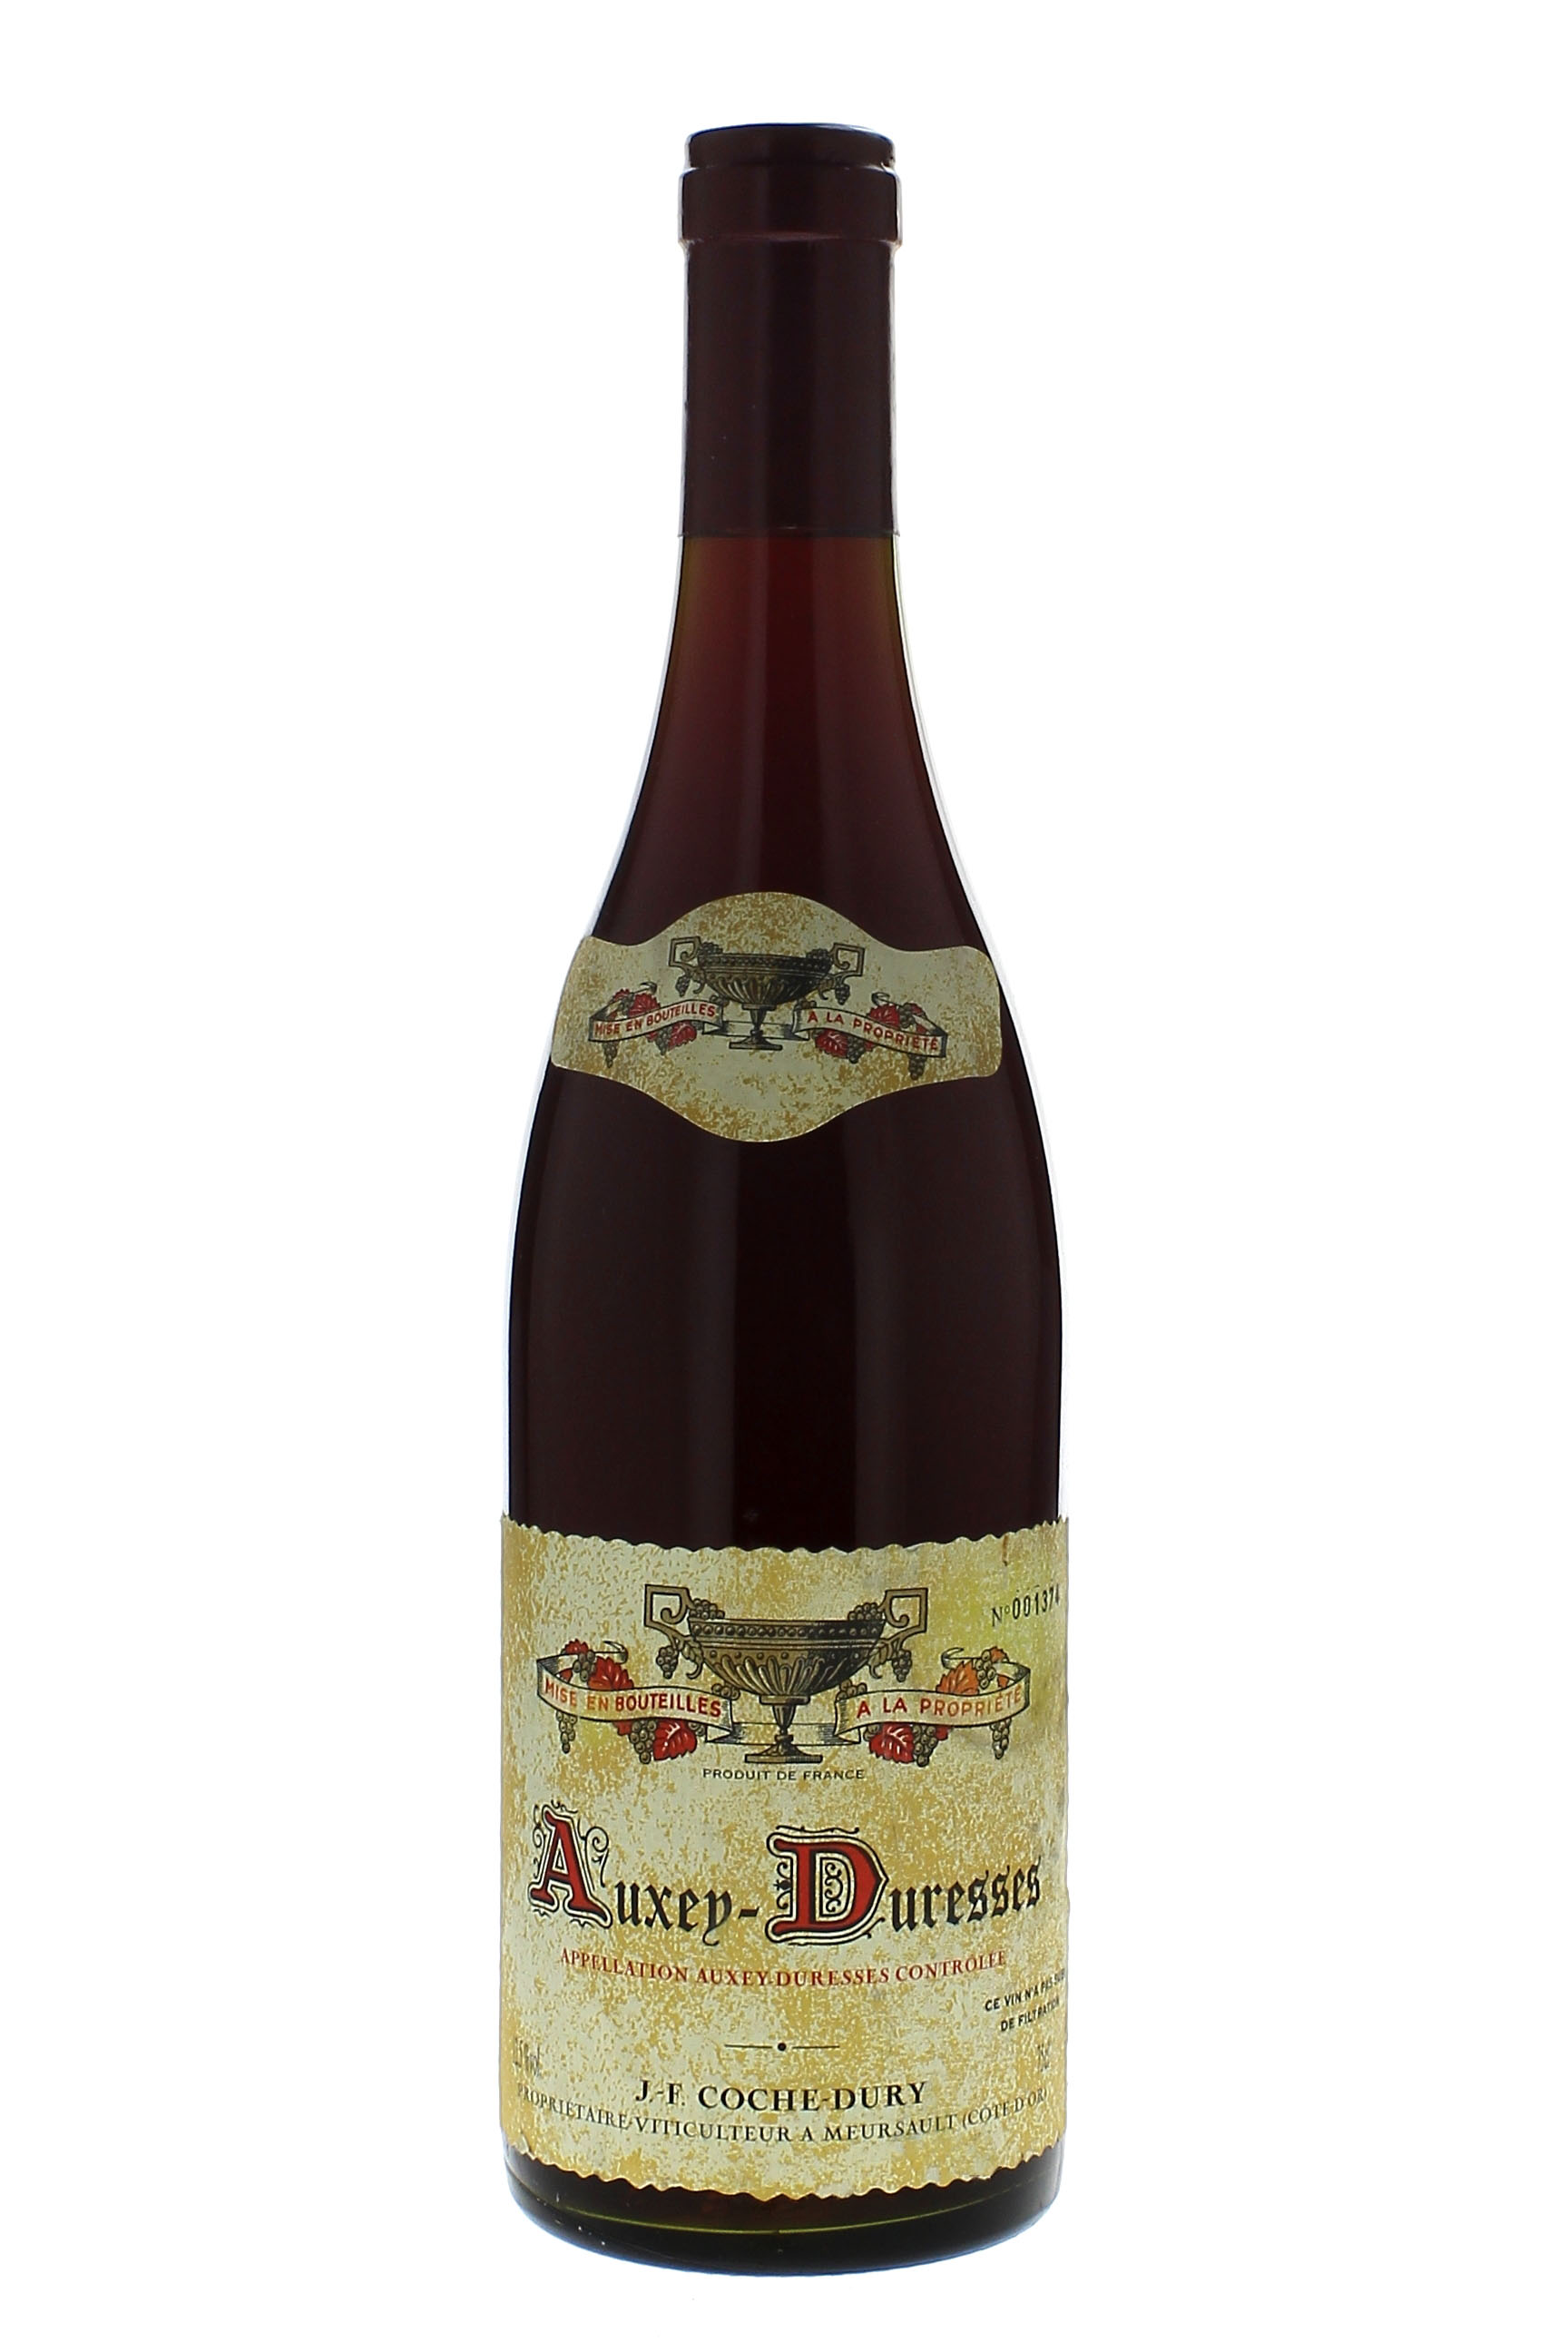 Auxey duresses 2013 Domaine COCHE-DURY, Bourgogne rouge